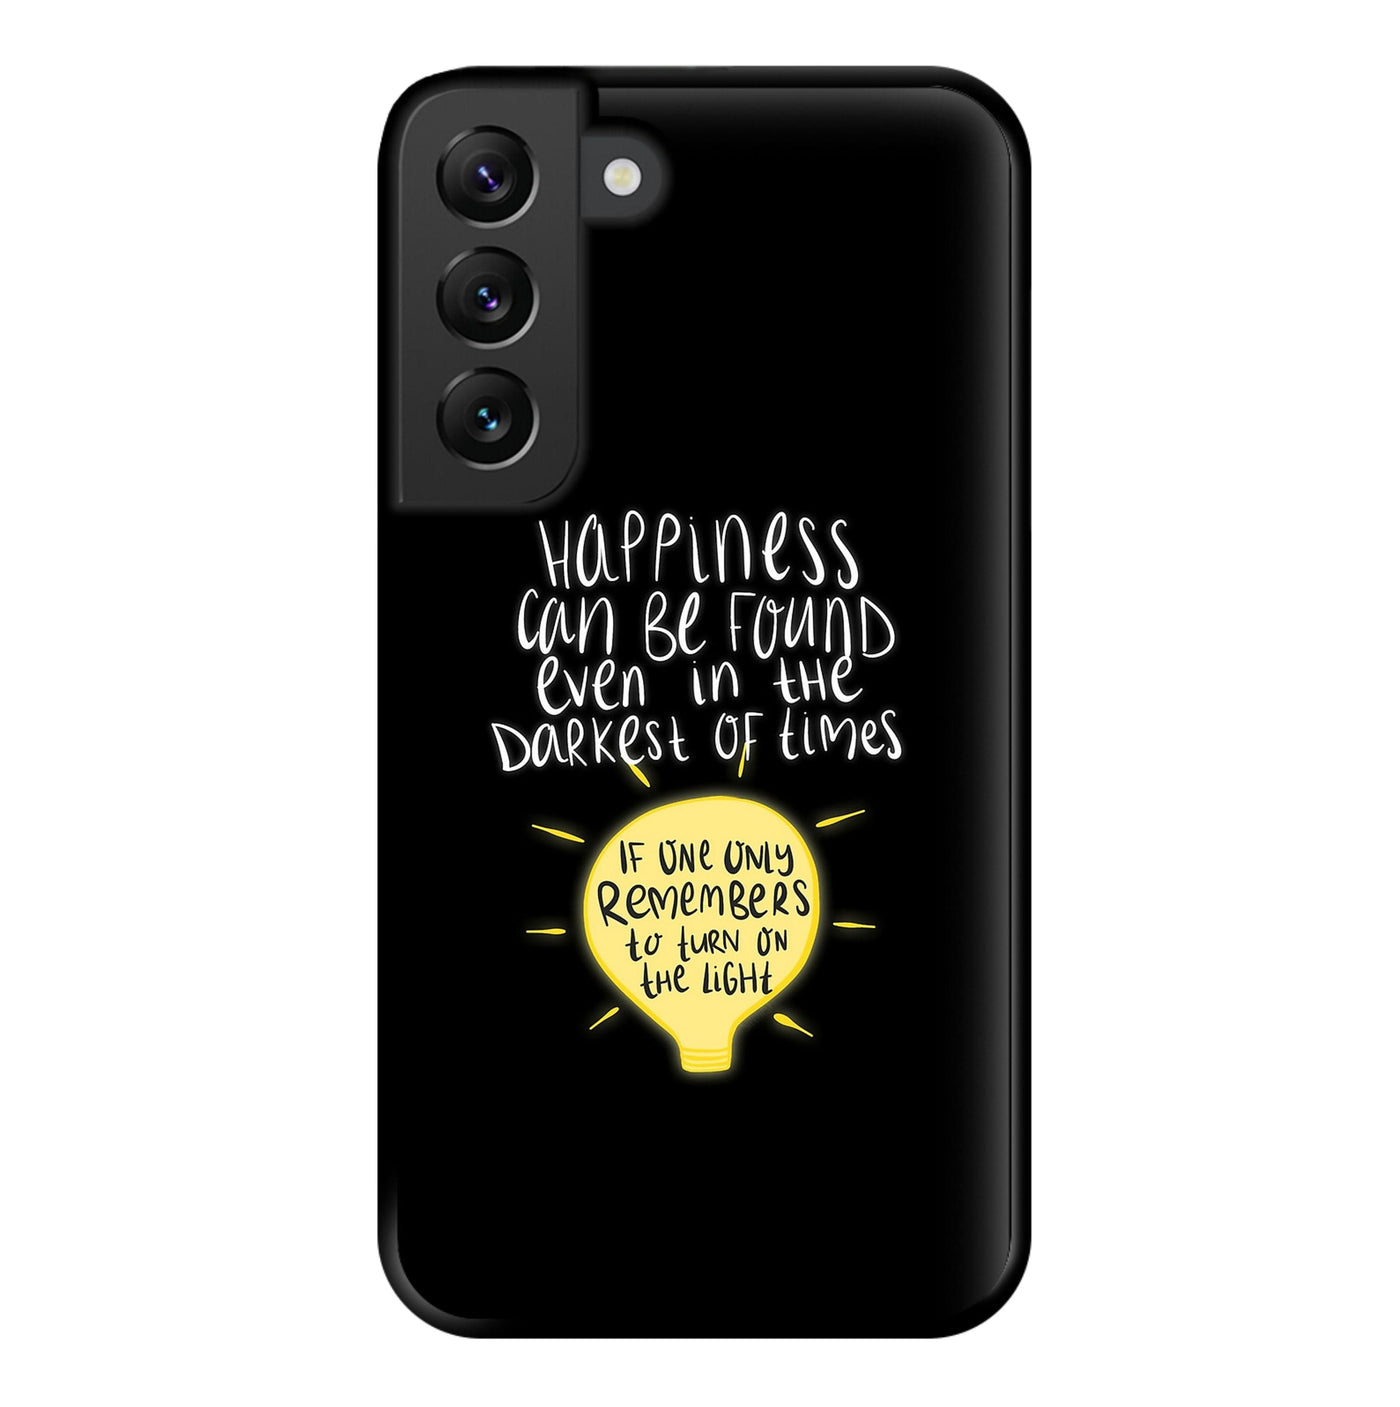 Happiness Can Be Found In The Darkest of Times - Harry Potter Phone Case